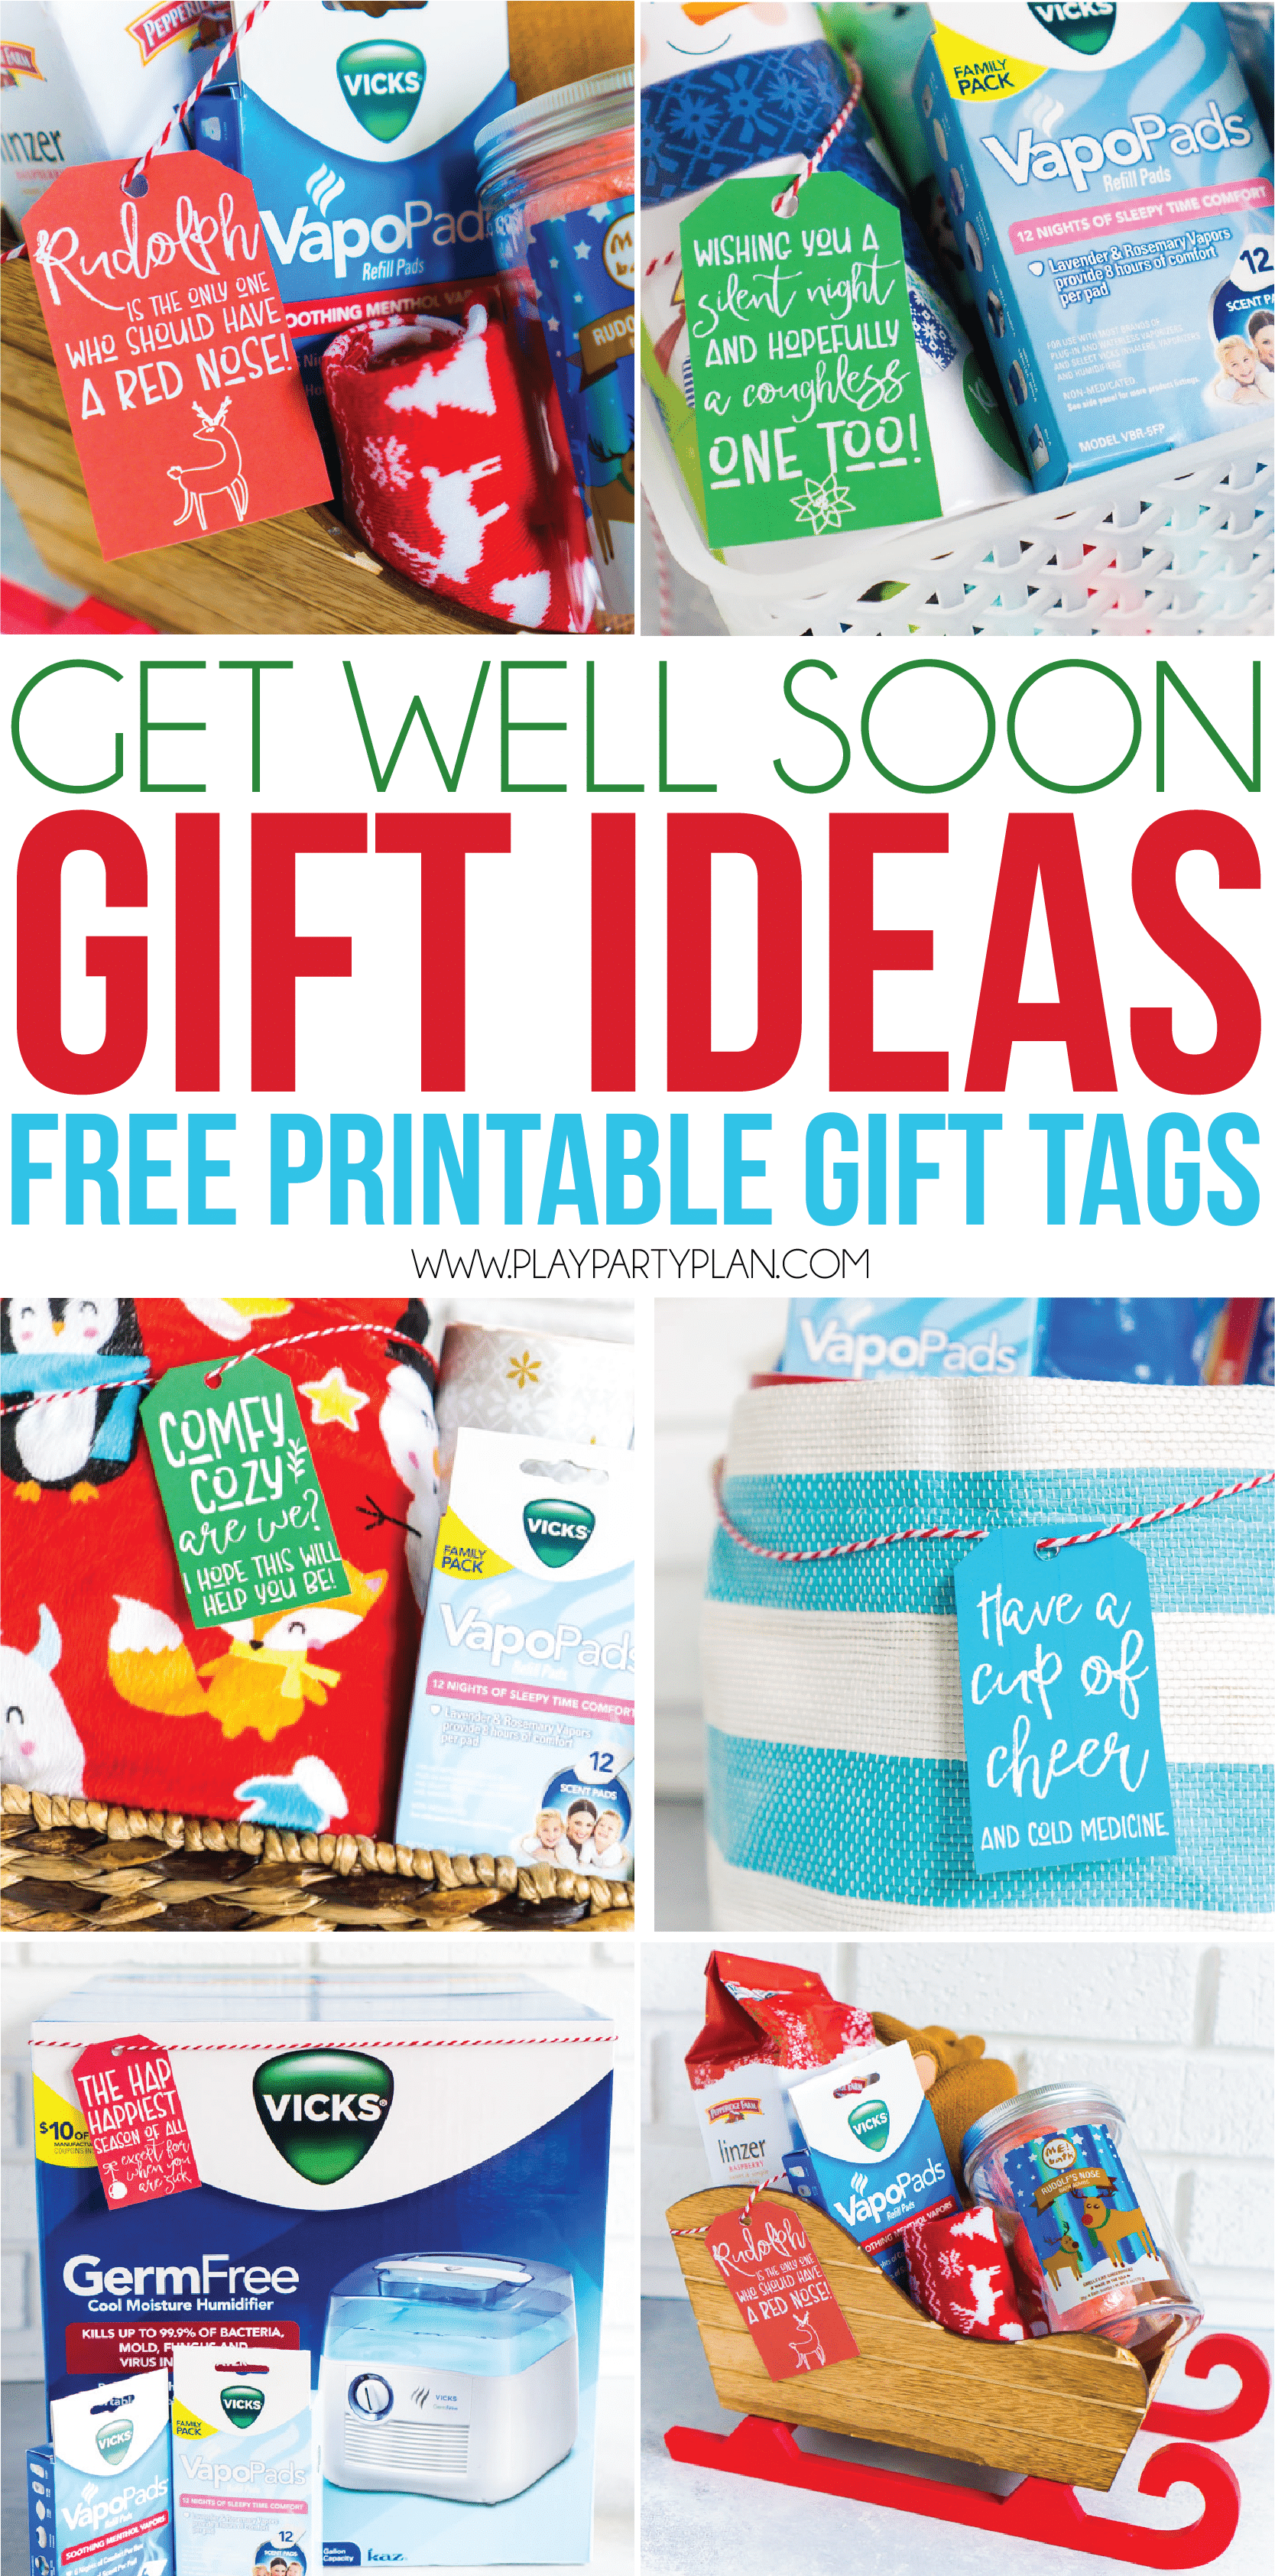 Funny Get Well Soon Gifts   Free Printable Cards - 32